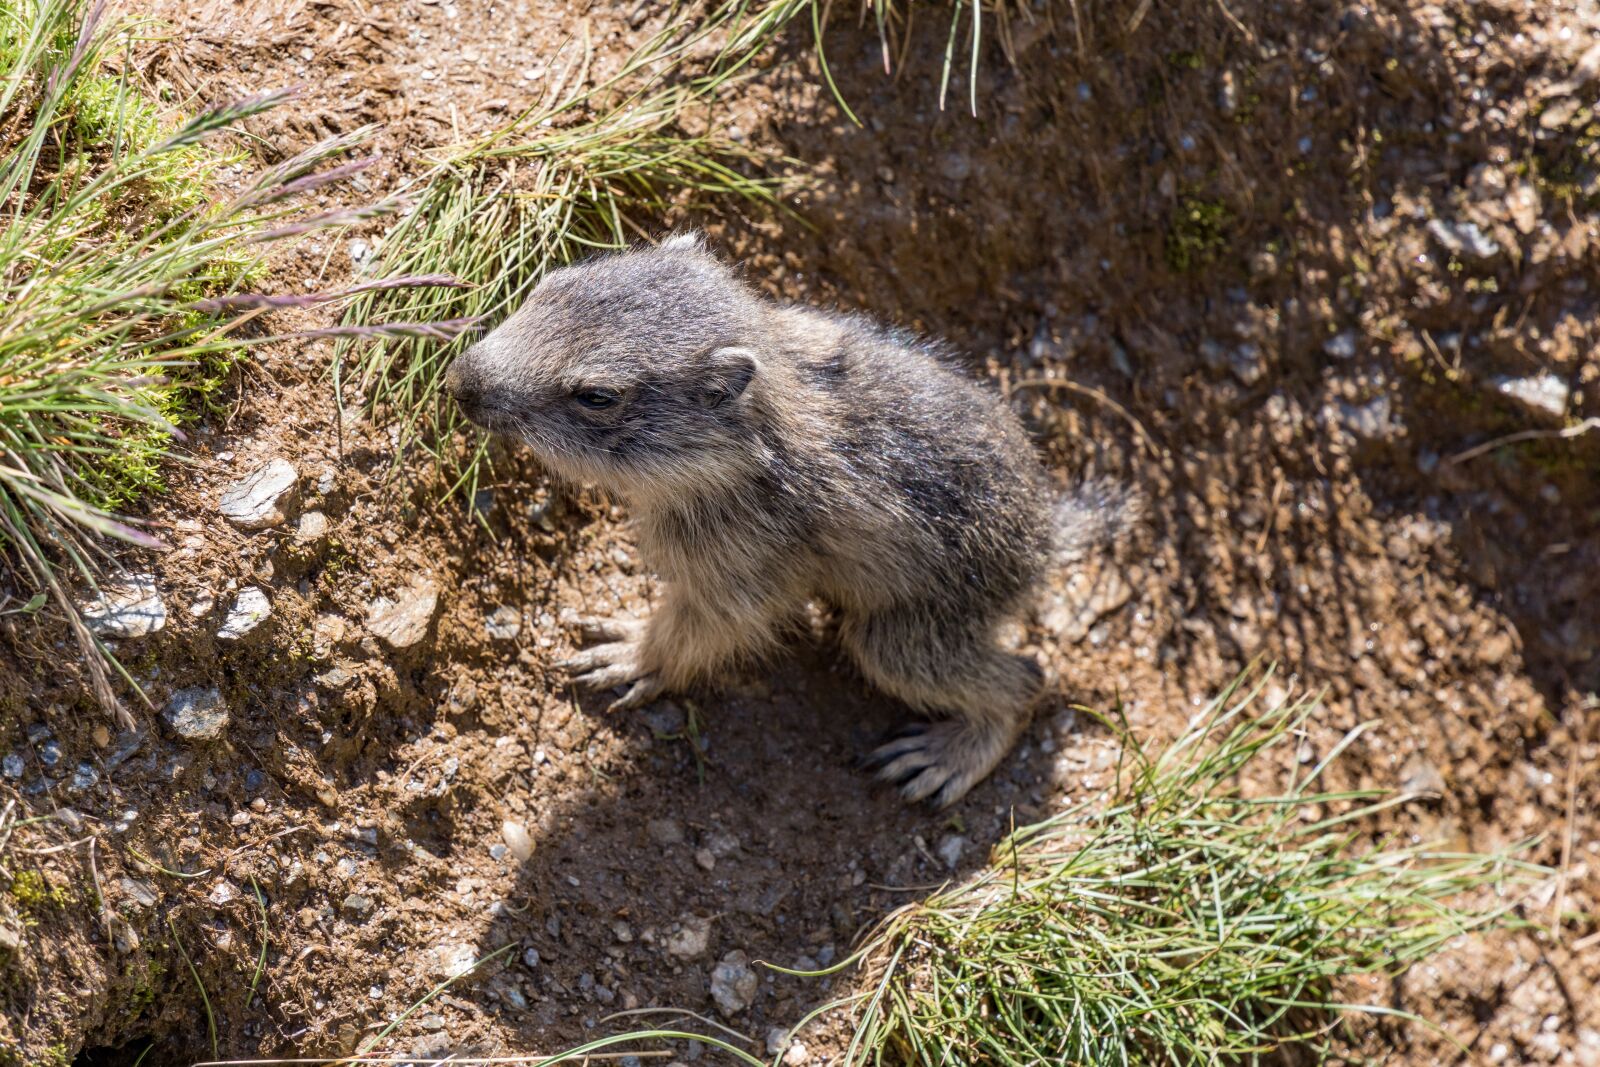 Tamron 28-300mm F3.5-6.3 Di VC PZD sample photo. Marmot, baby, rodent photography